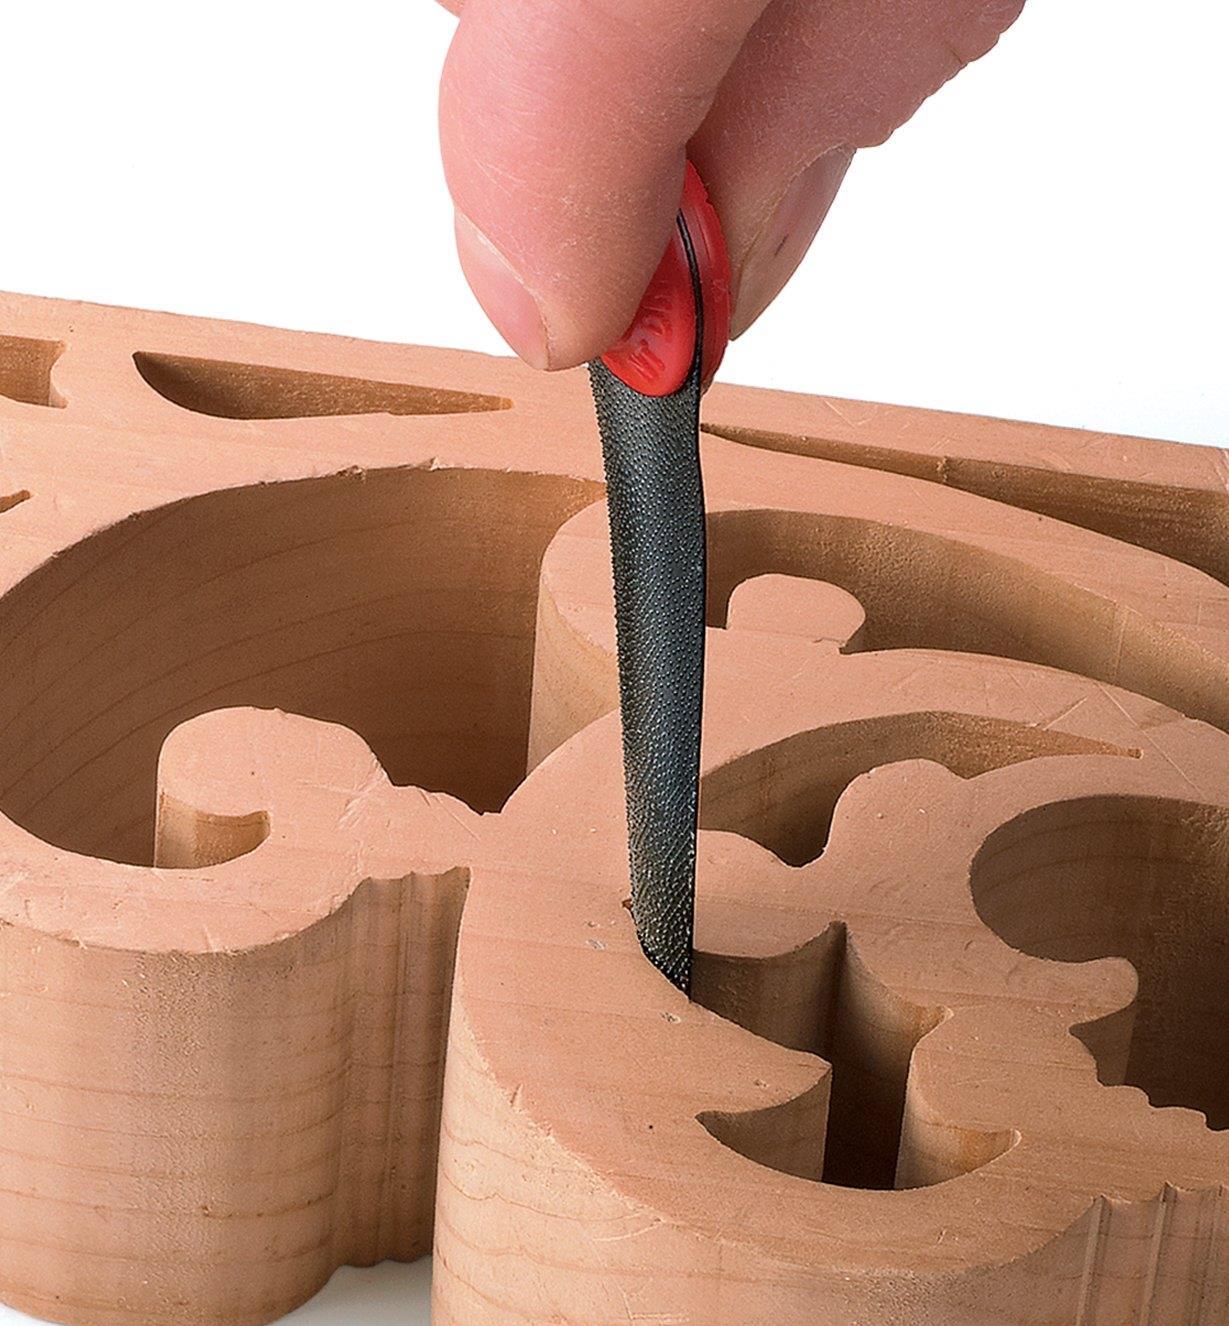 Filing inside a scroll carving with the convex tapered finger file